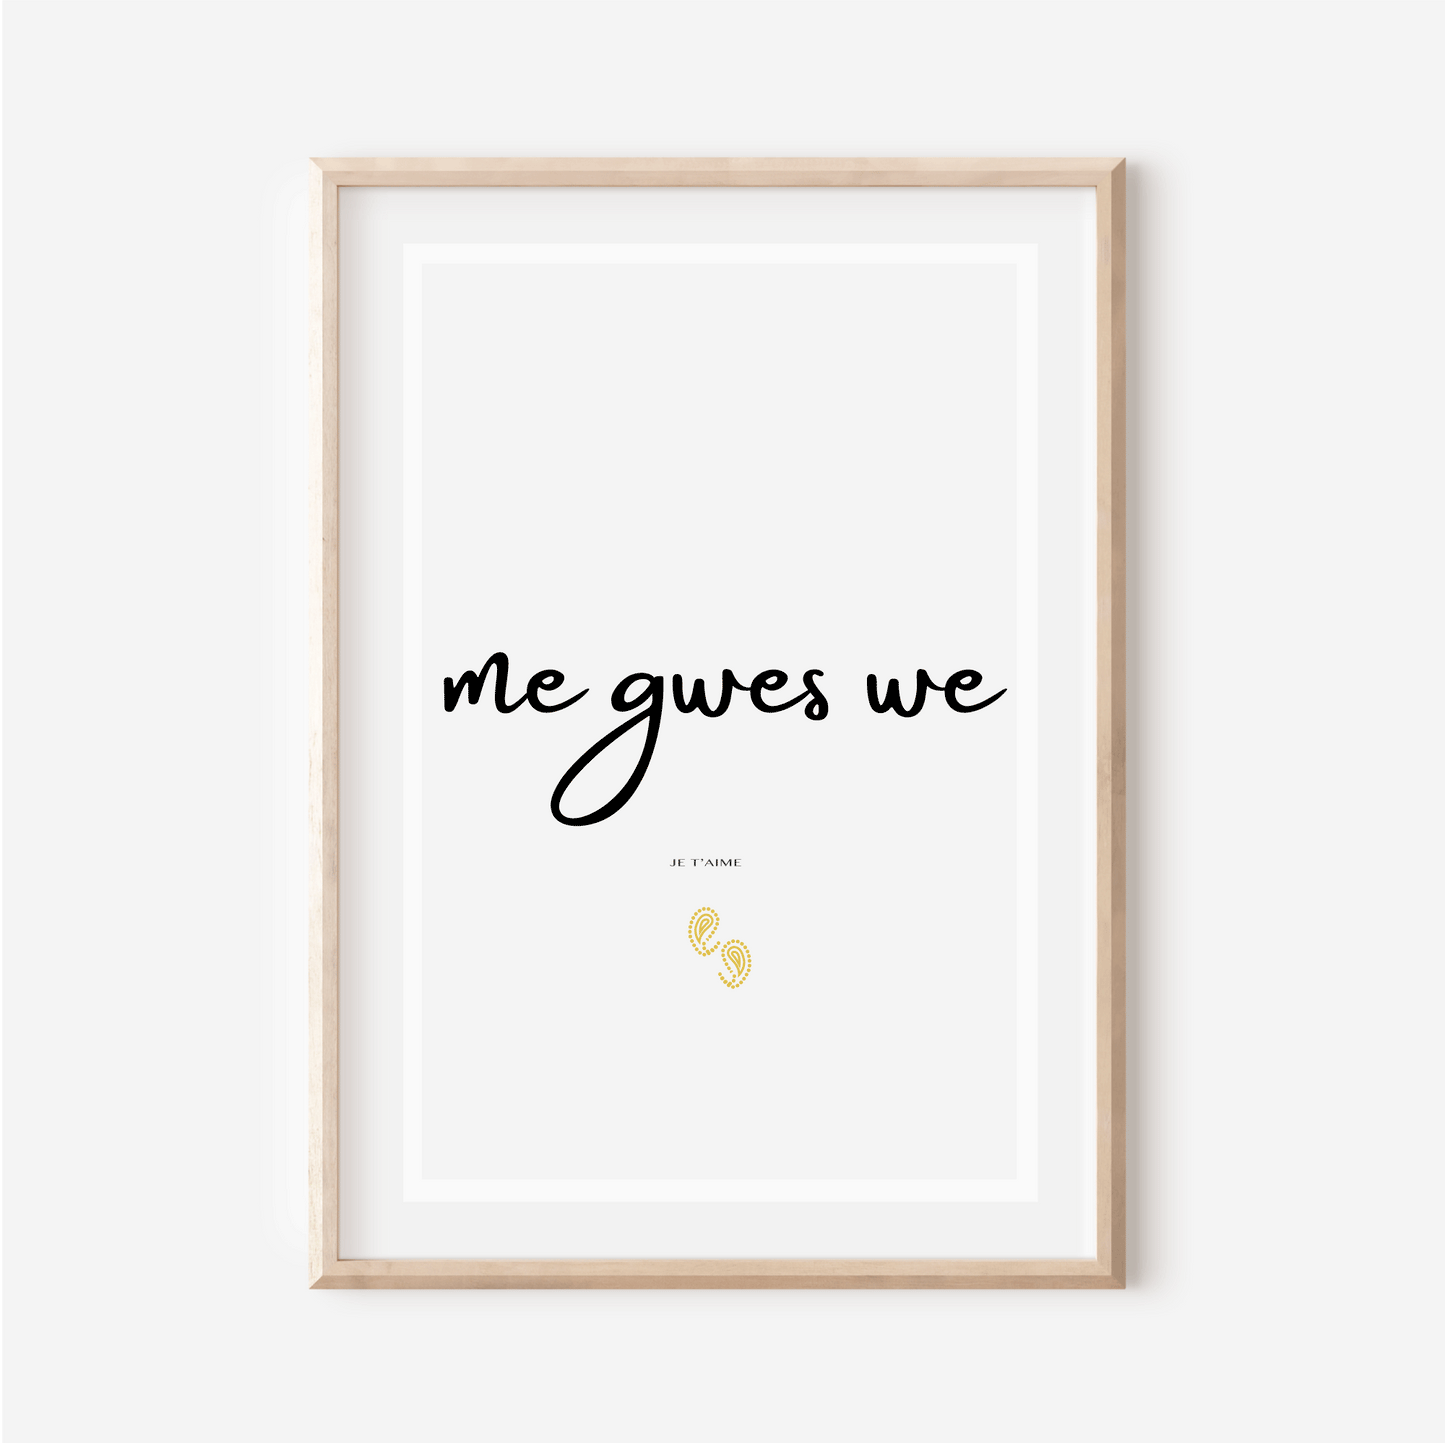 "I love you" in Basaa - "Me ngwes we" poster